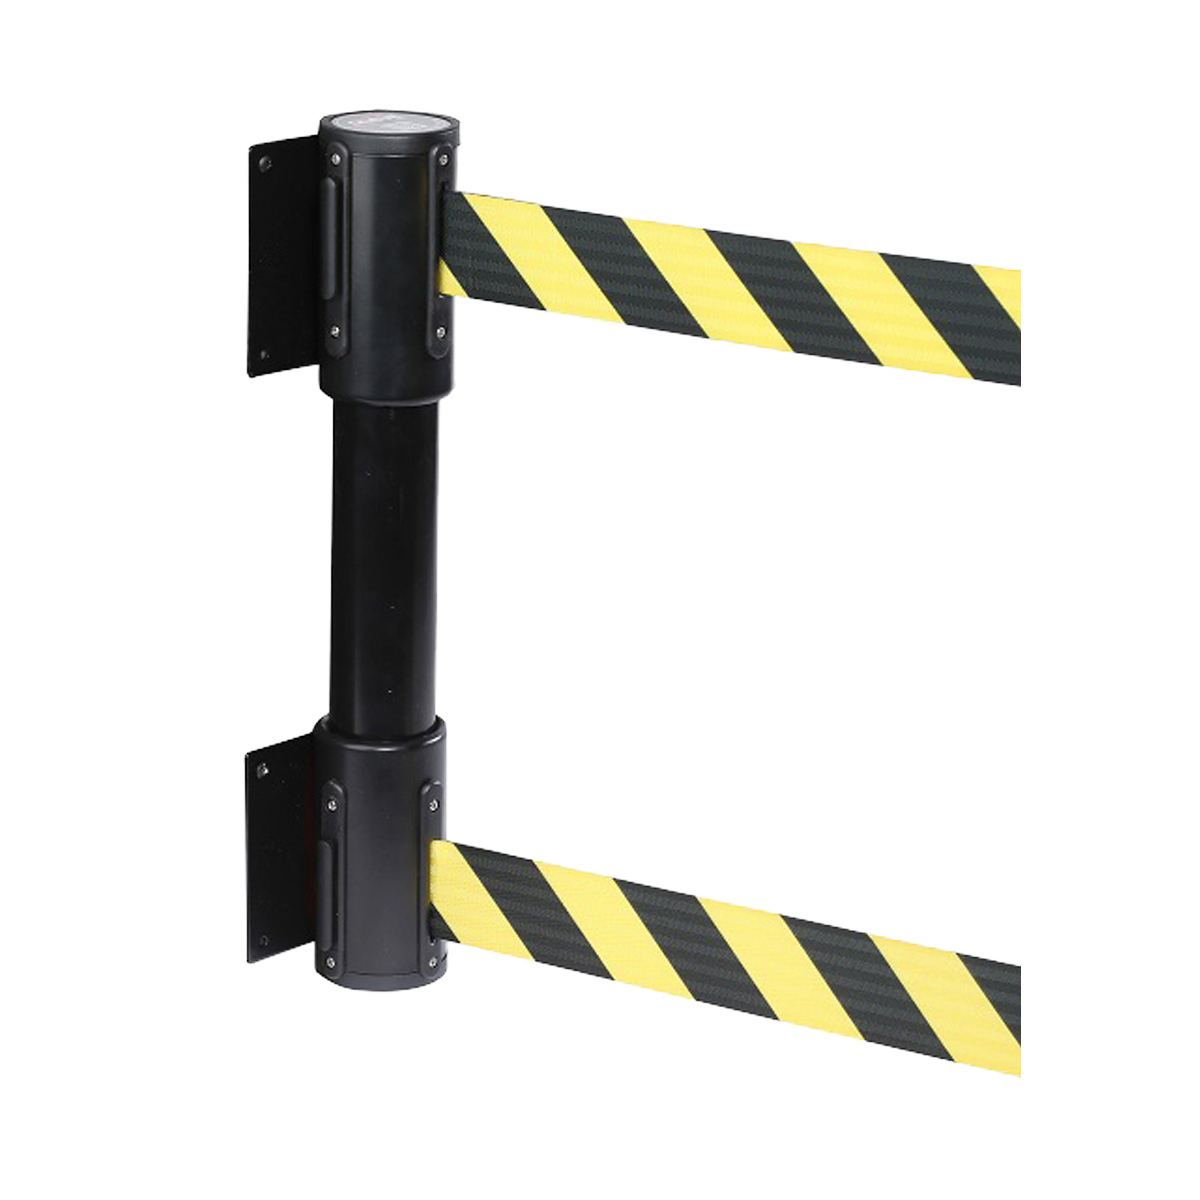 WallMaster Twin Wall Mounted Belt Barriers Are Ideal For Restricting Access to Closed Areas